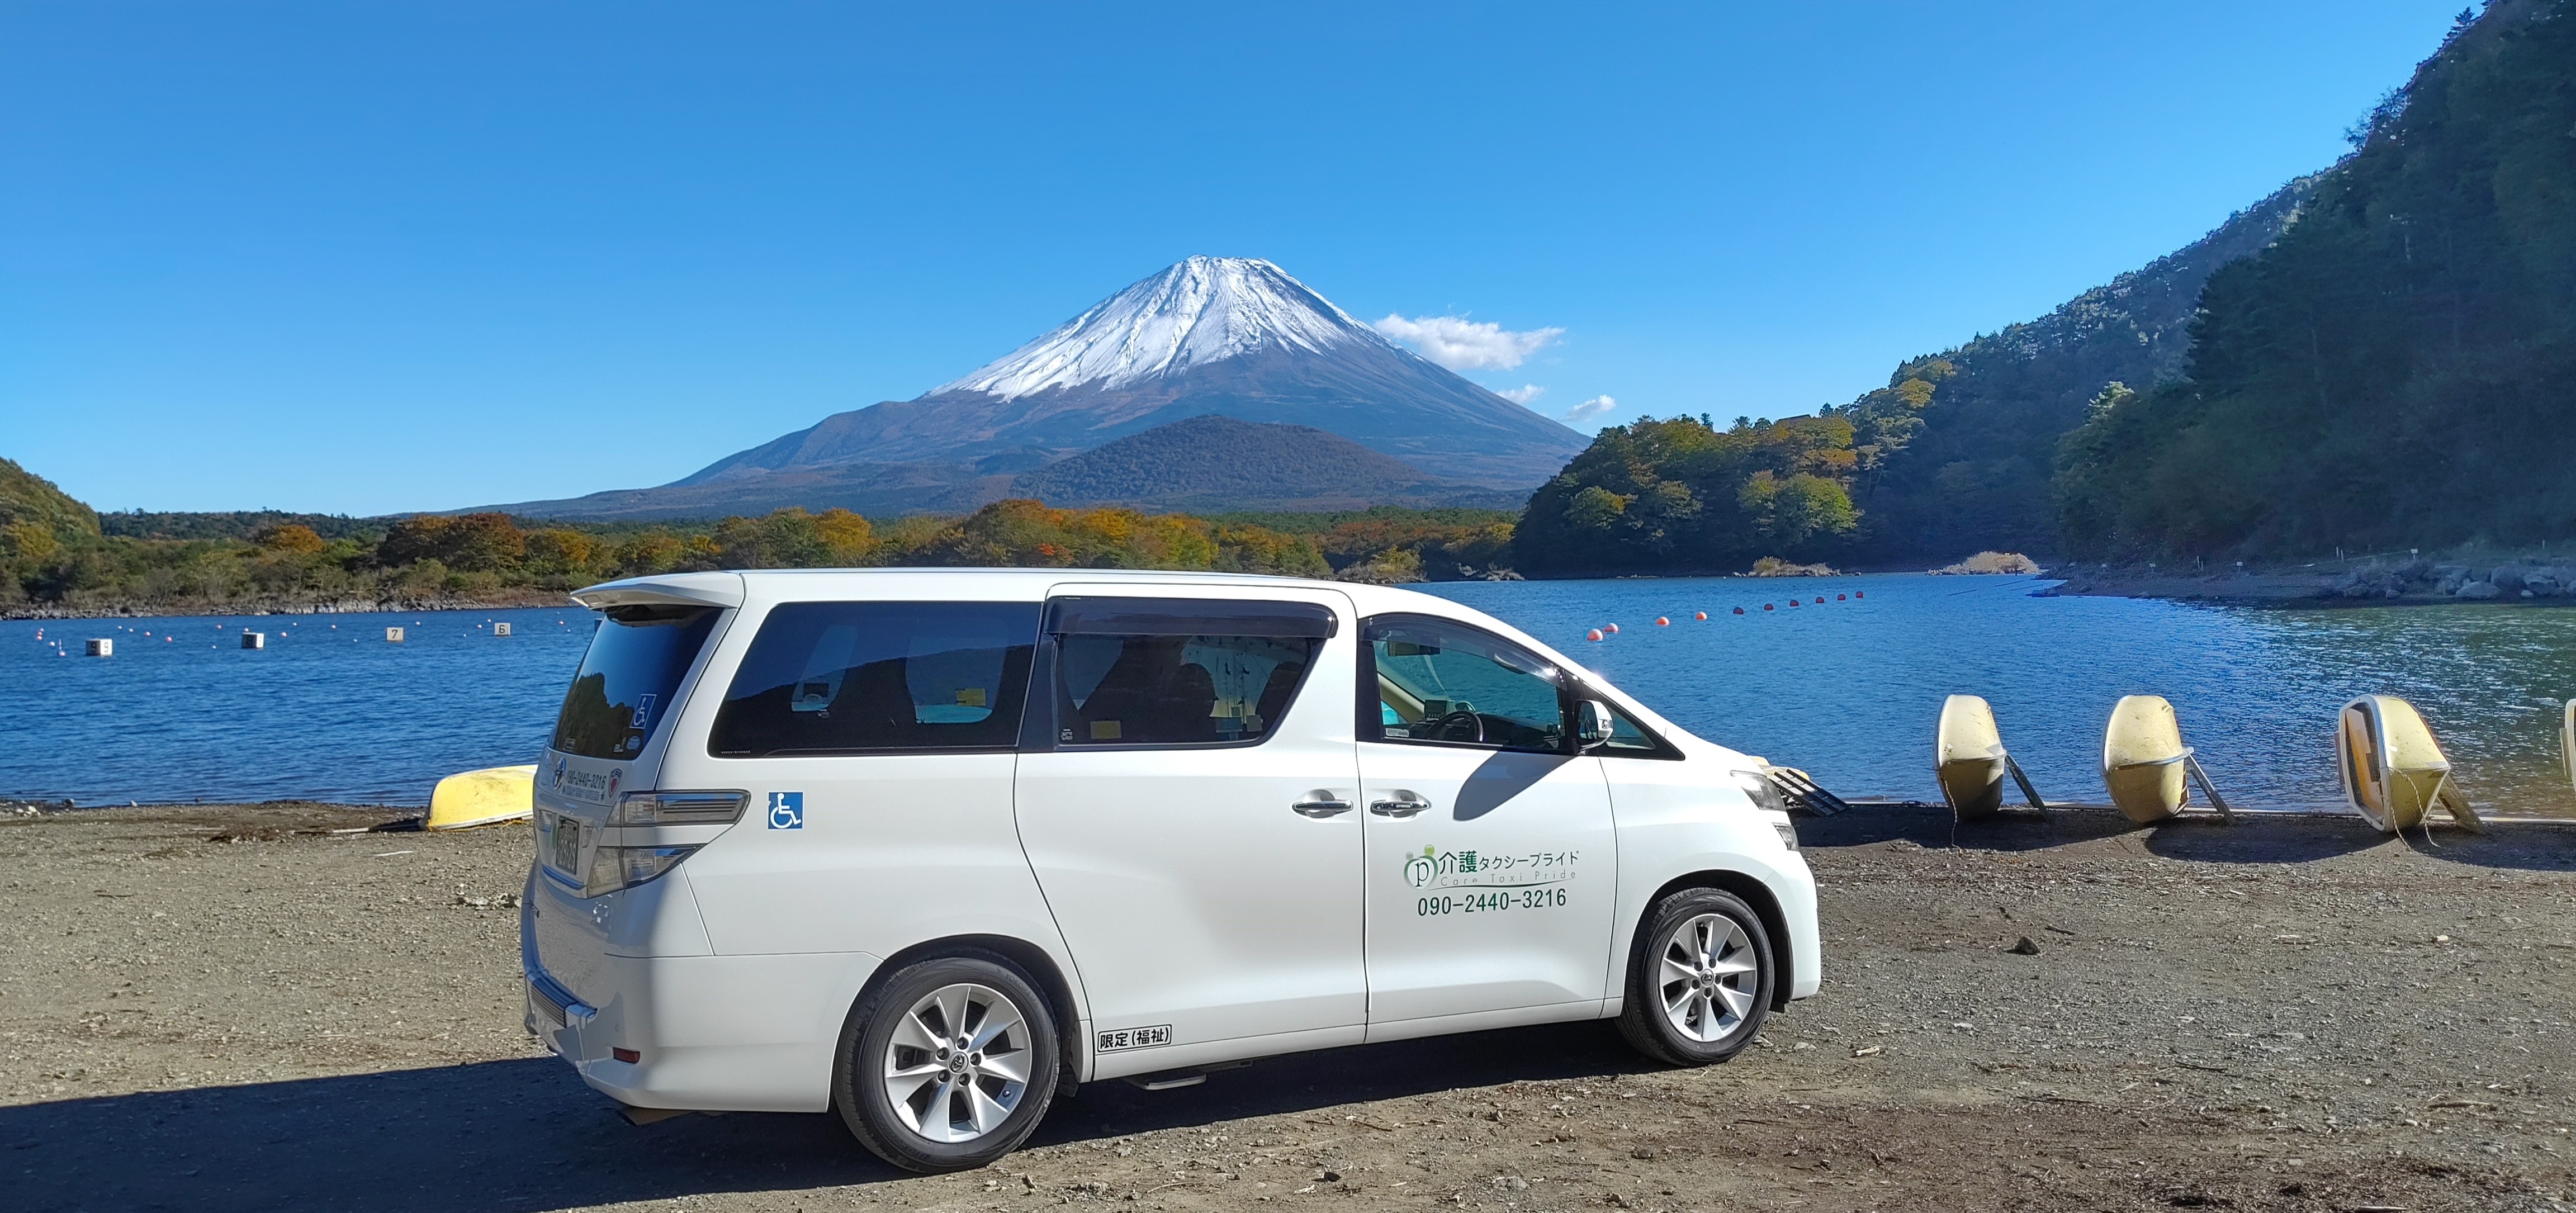 Our Special Vehicle in front of Mt Fuji